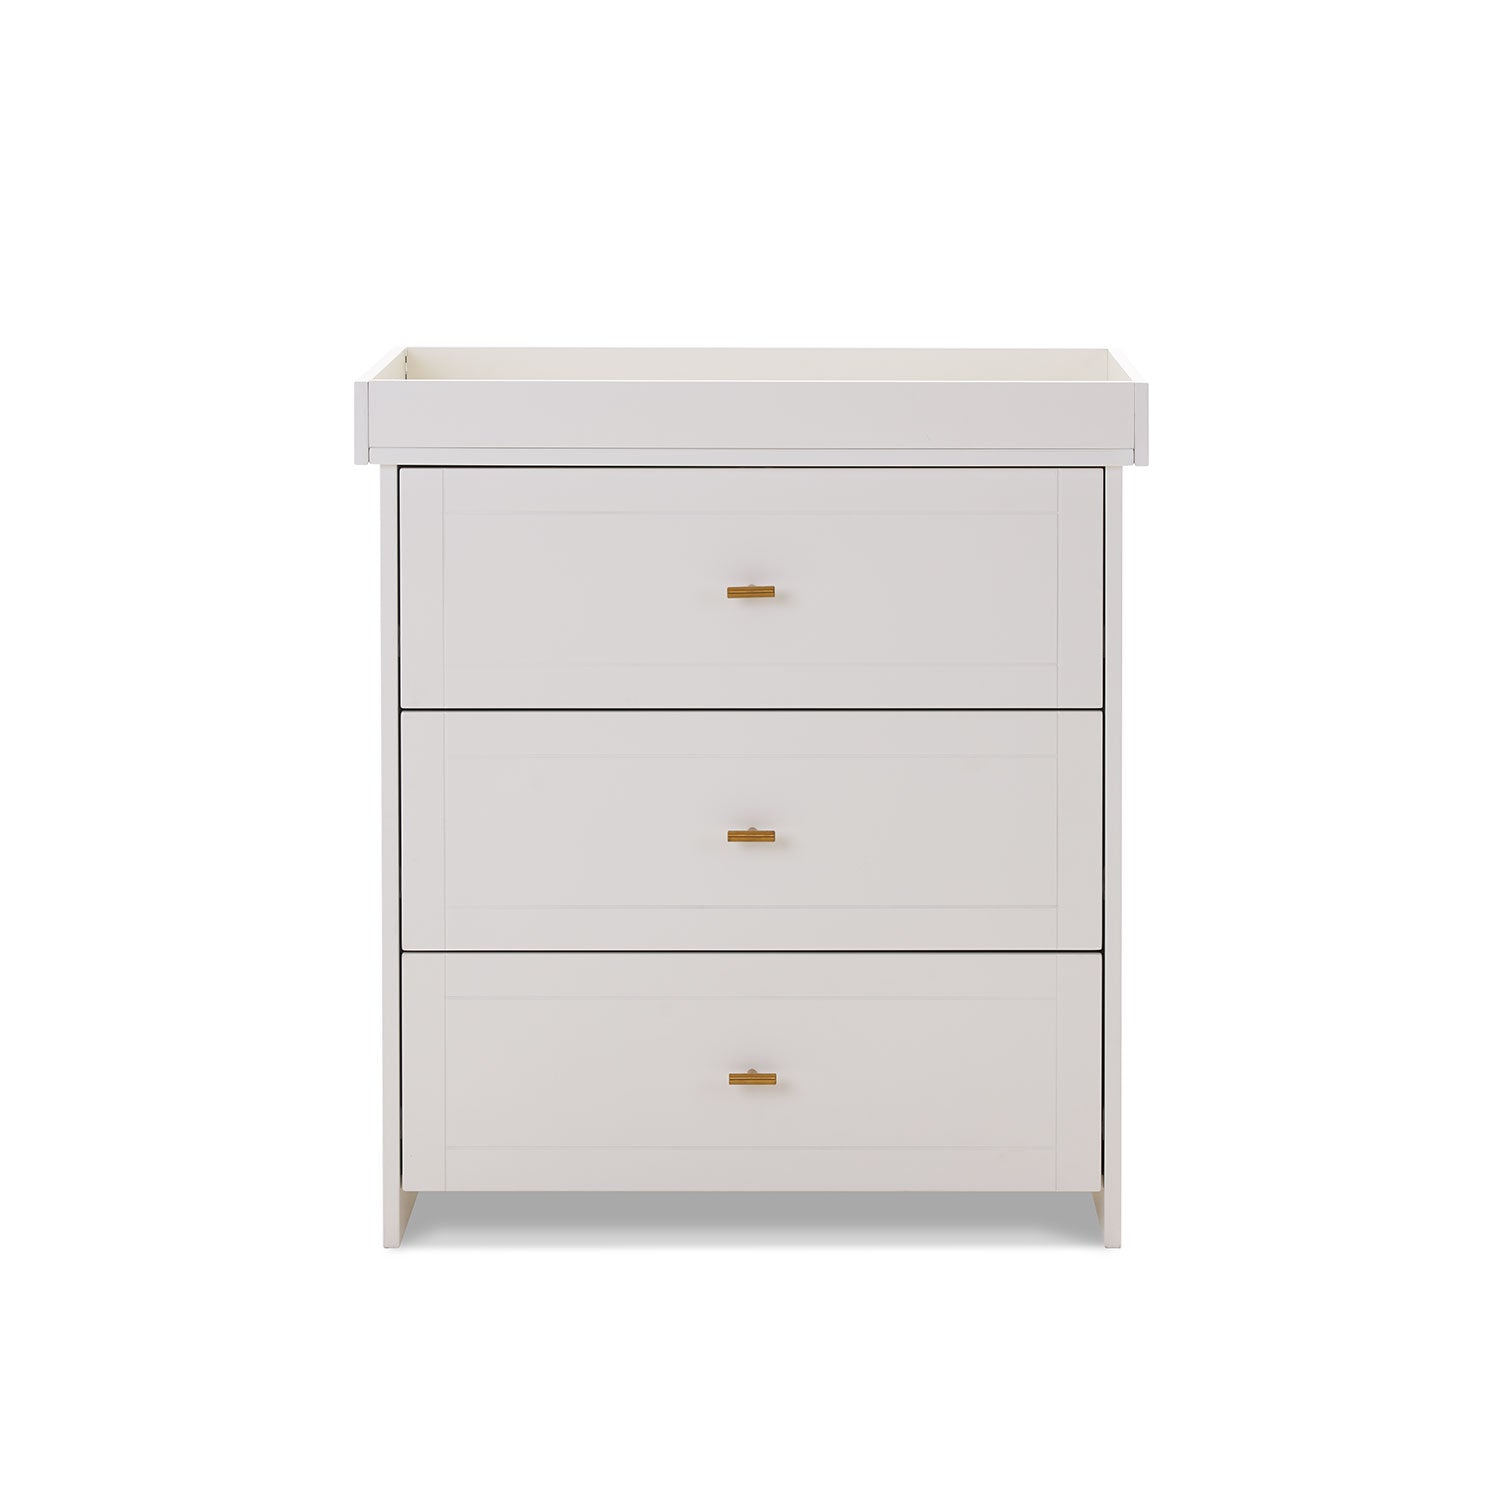 Evie Changing Unit - White